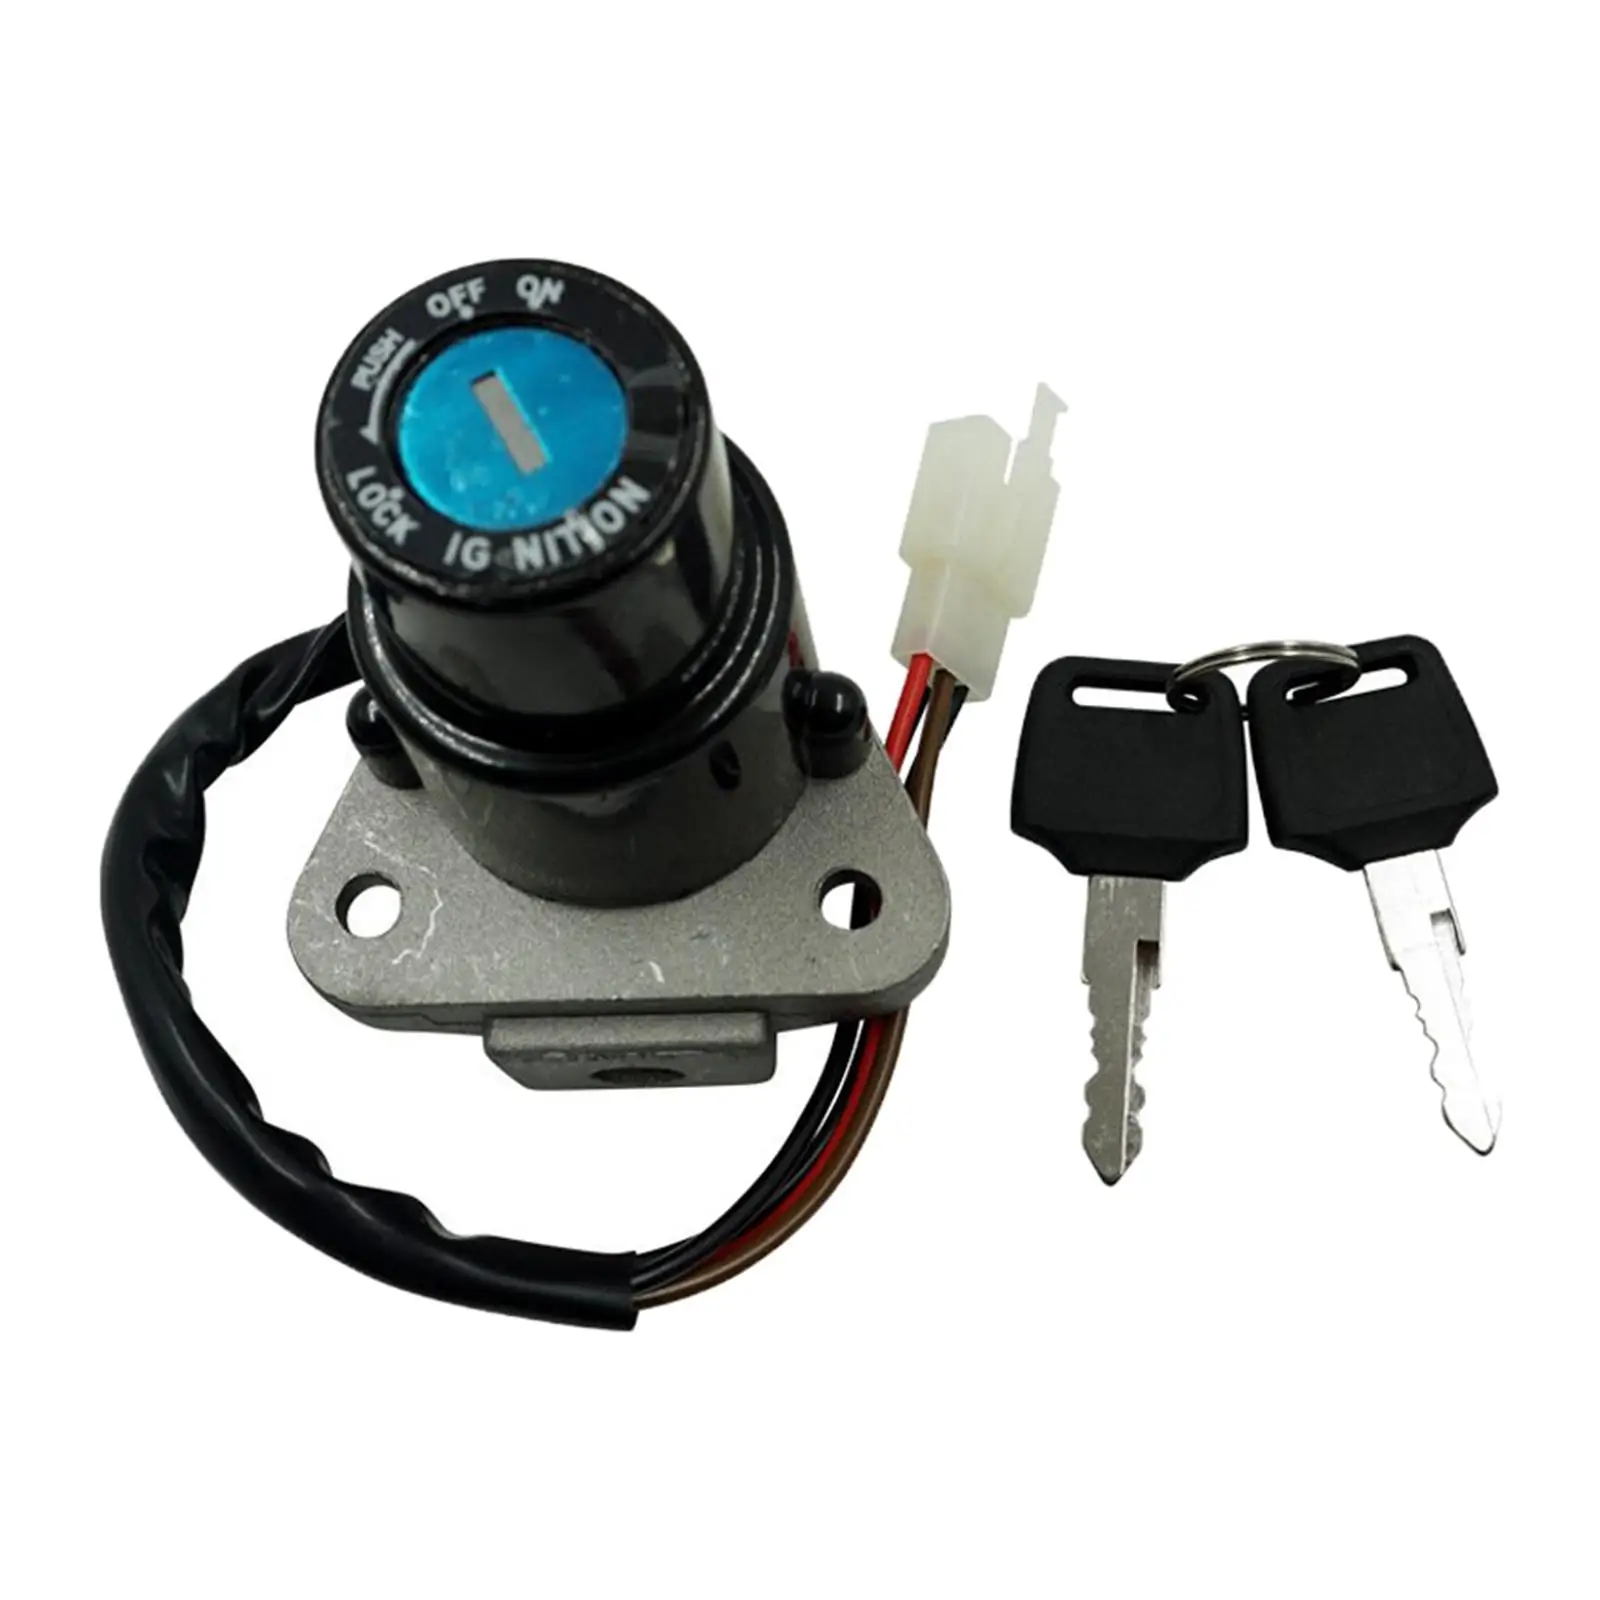 

Motorbike Ignition Switch Key Replacement Electric Door Lock Fit for Yamaha DT125 TW200 TW225 XT225 DT200